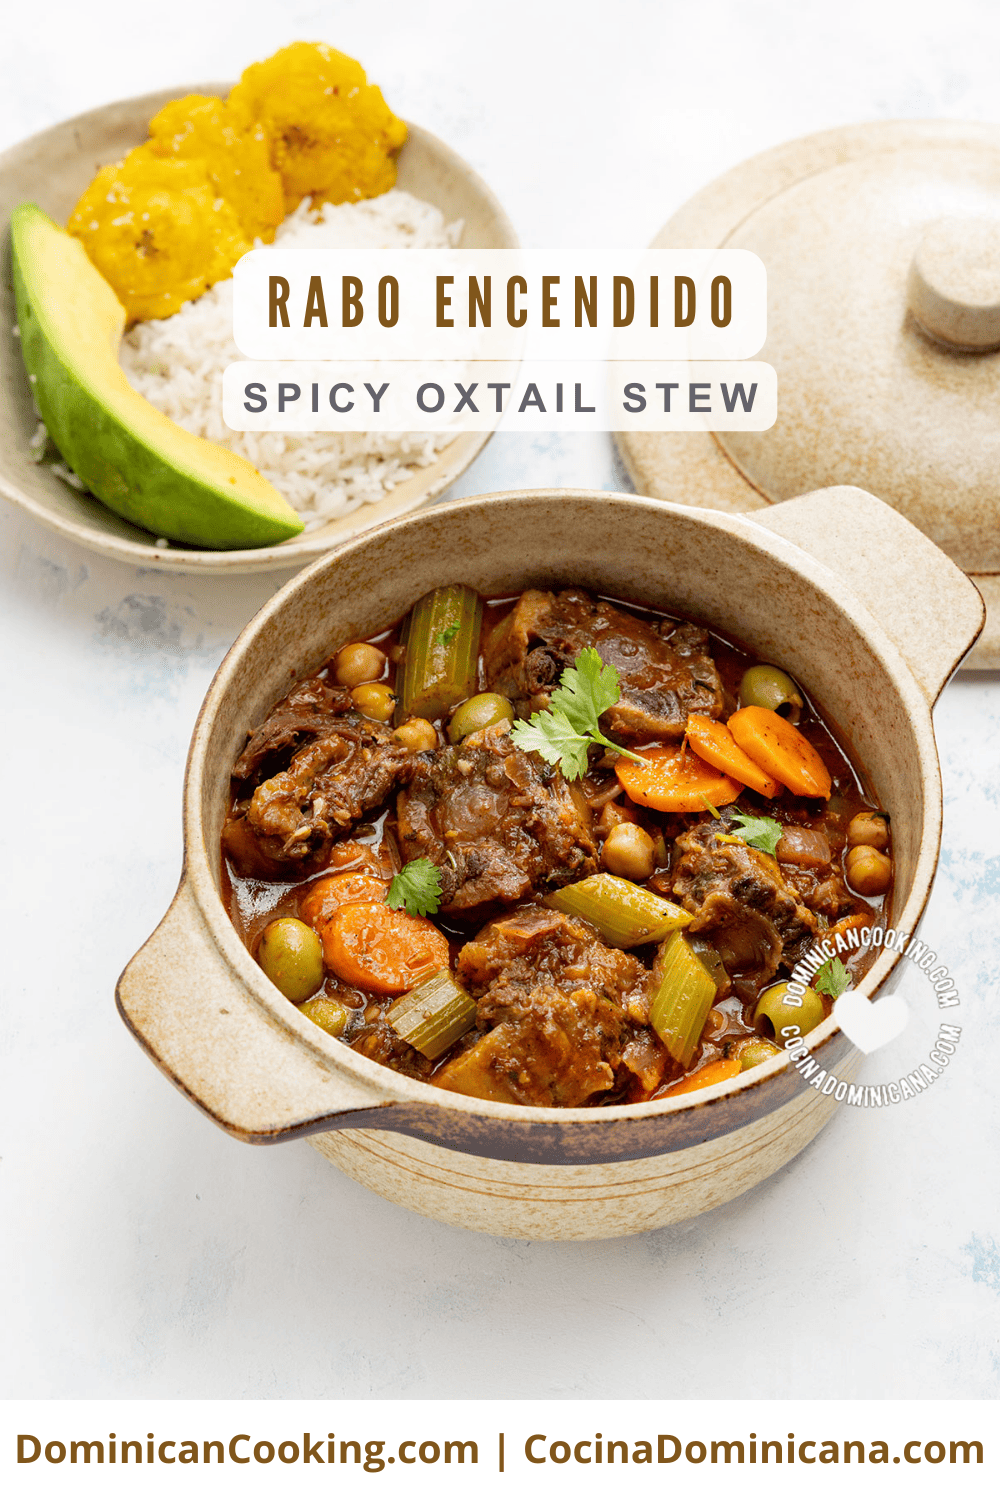 Rabo guisado (spicy oxtail stew).